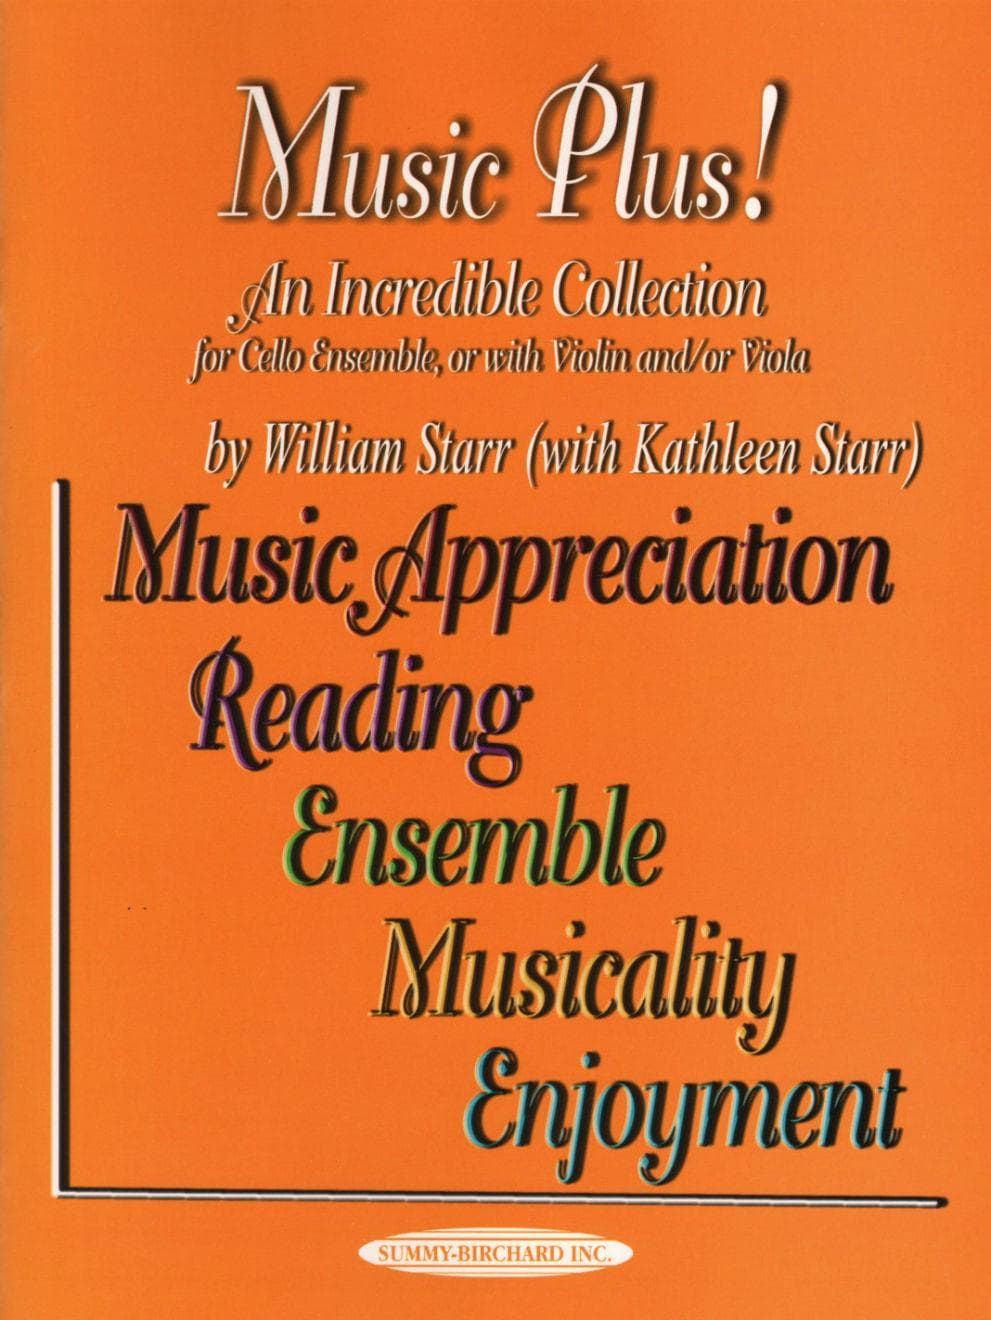 Starr, William - Music Plus! An Incredible Collection For Cello Ensemble (or with violin and/or viola) Published by Alfred Music Publishing